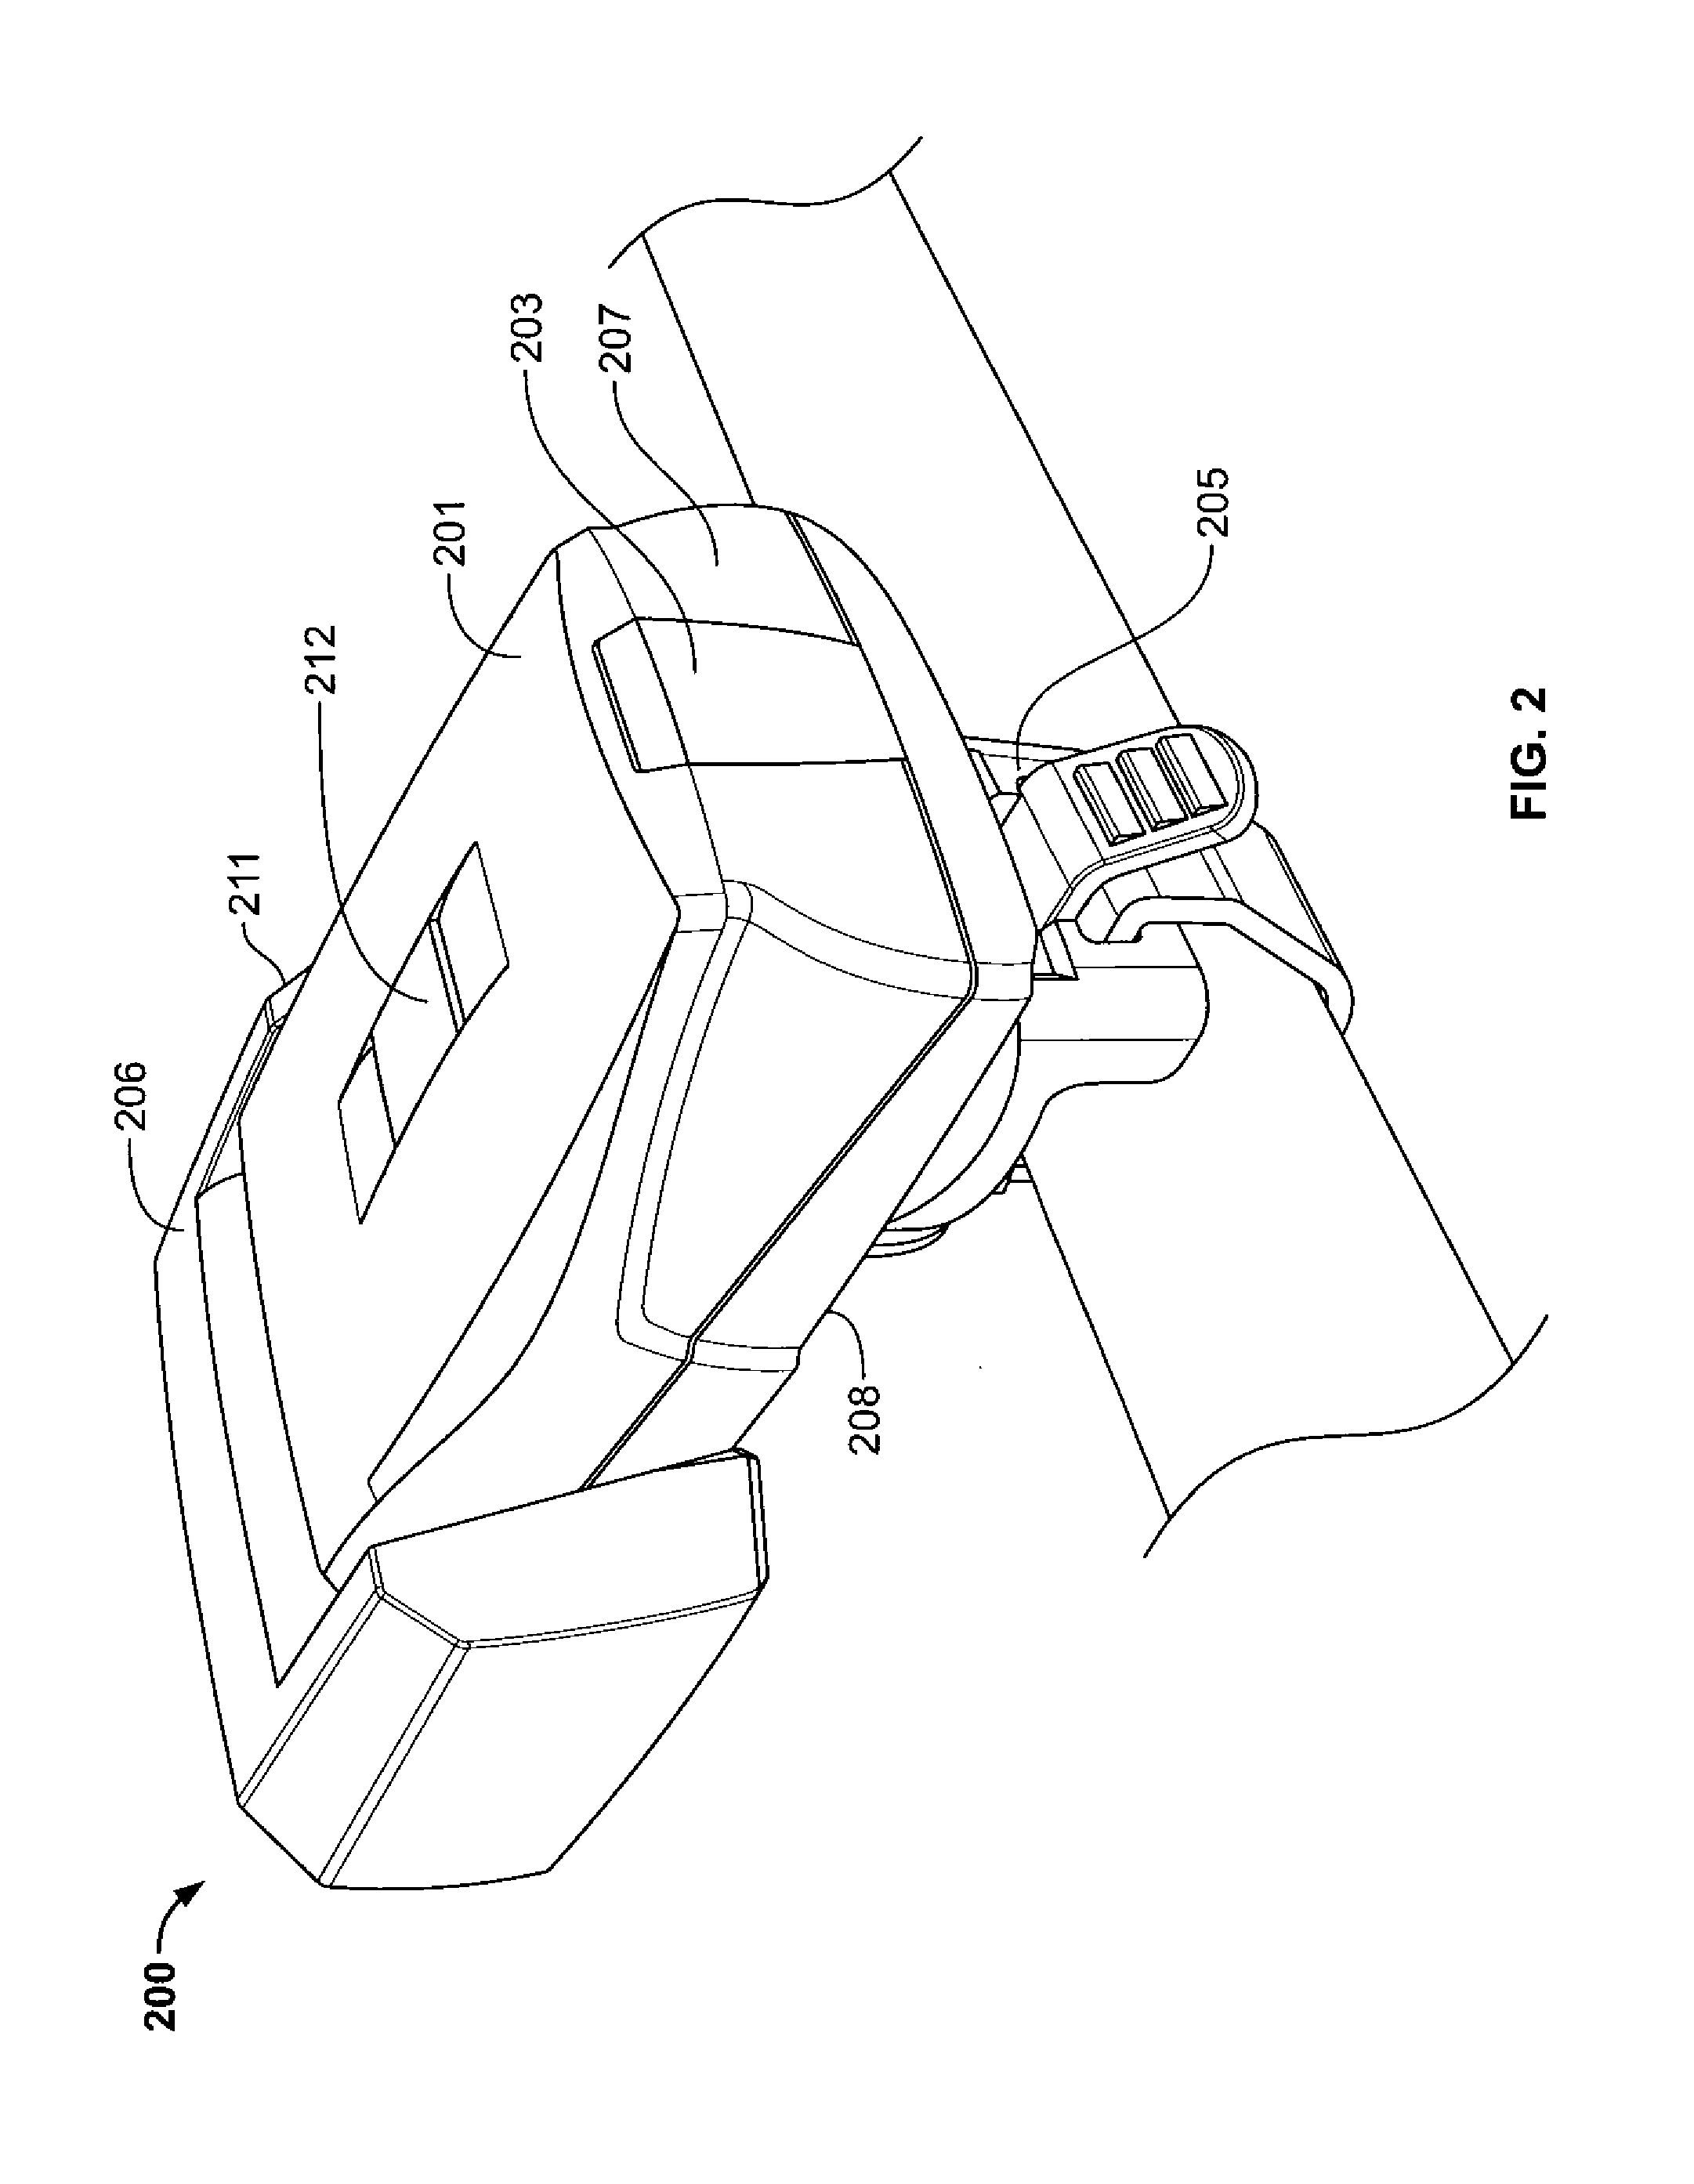 Pivotable LED lighting apparatus and universal mounting assembly and method